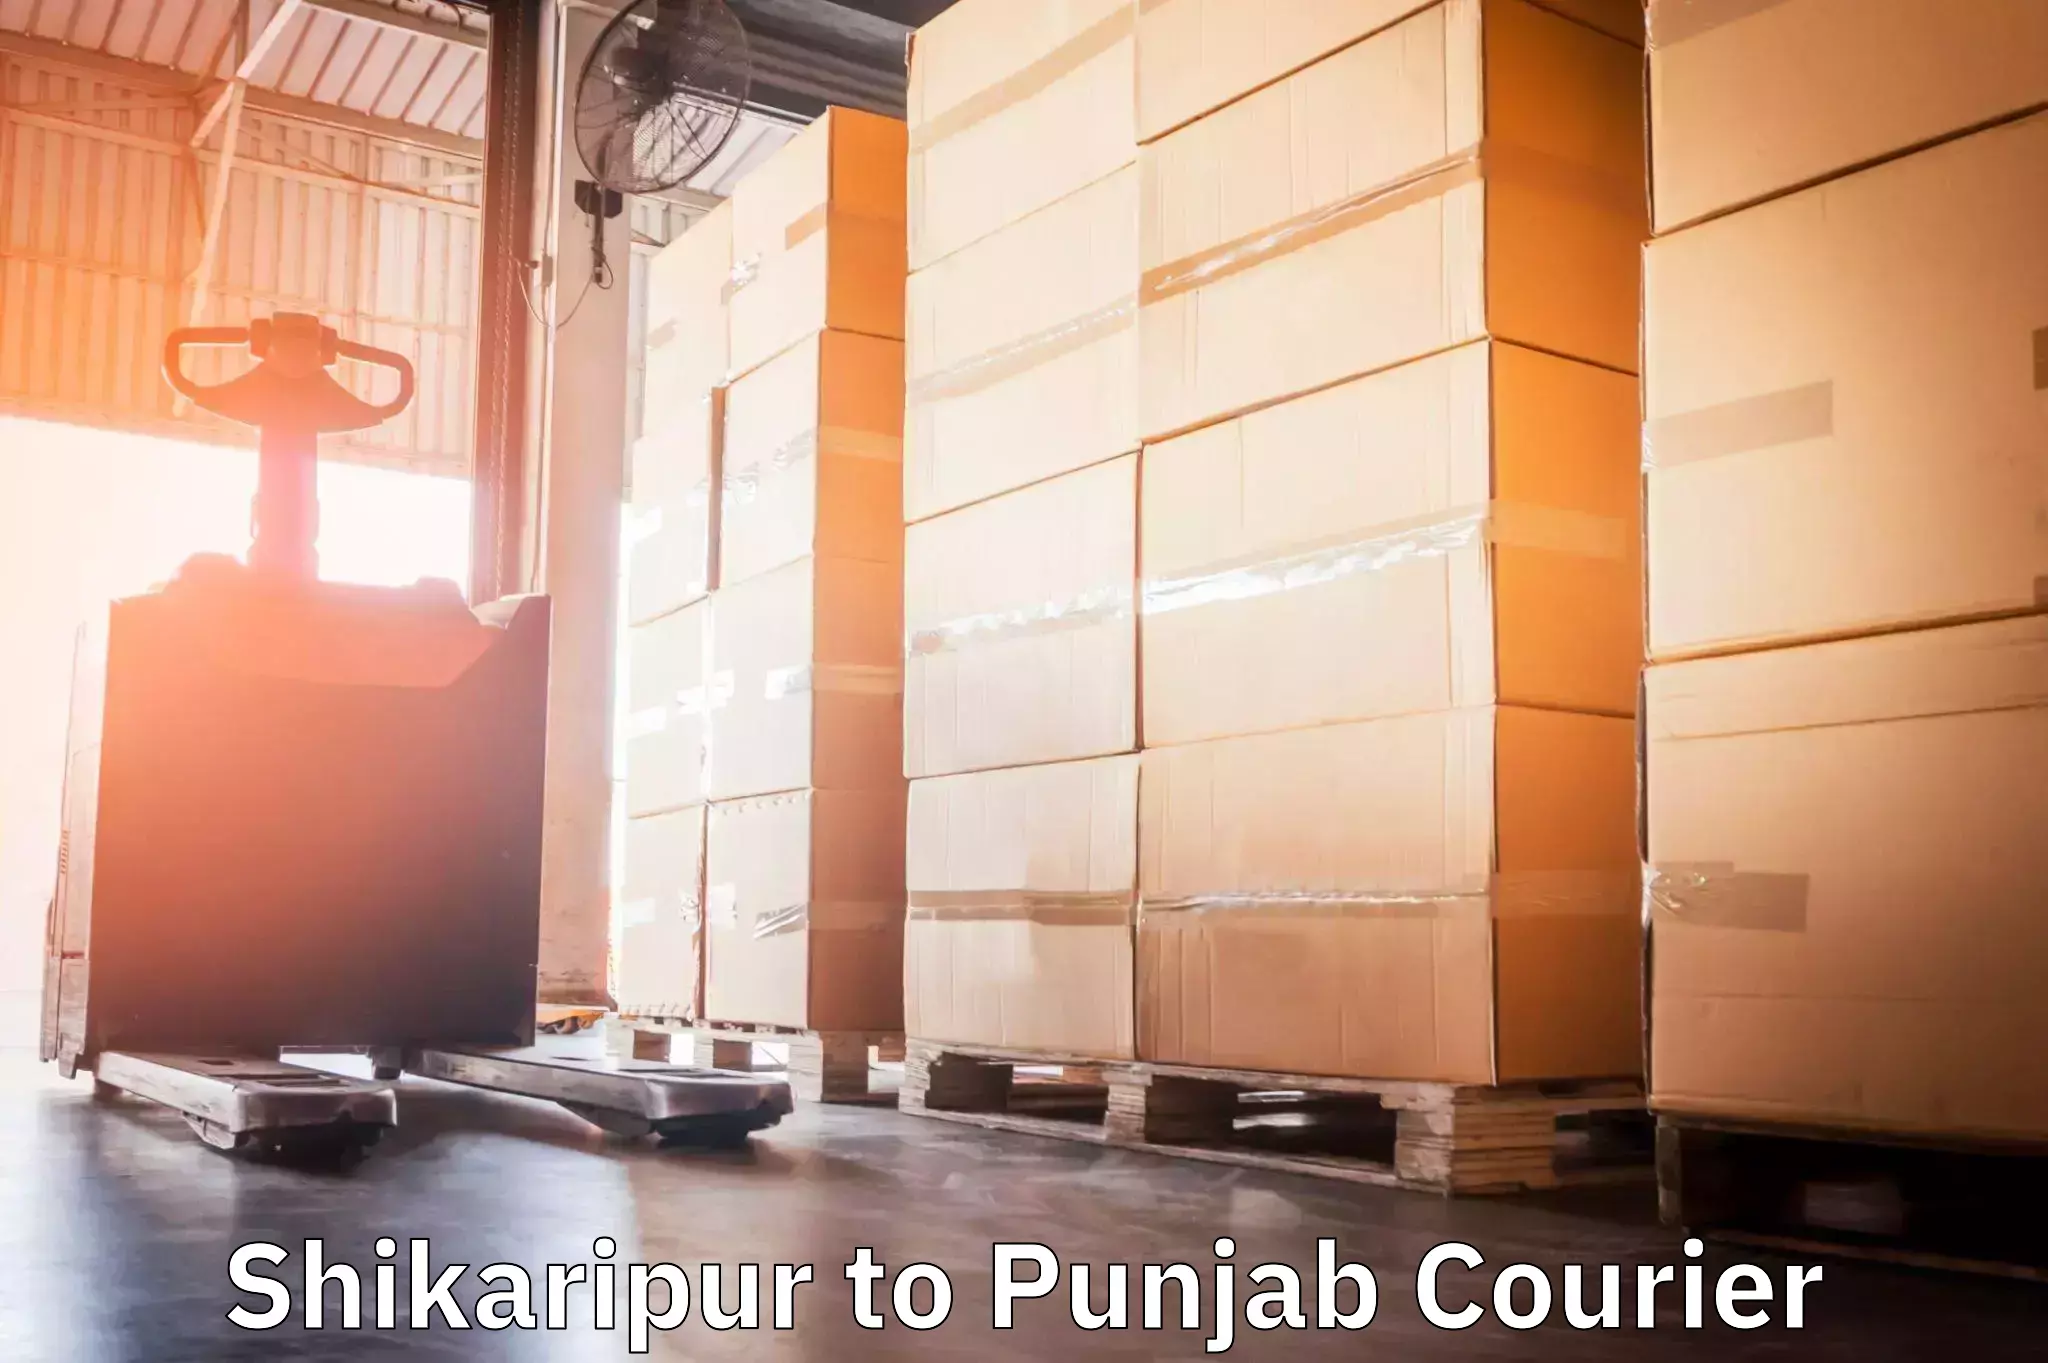 Package delivery network Shikaripur to Rajpura